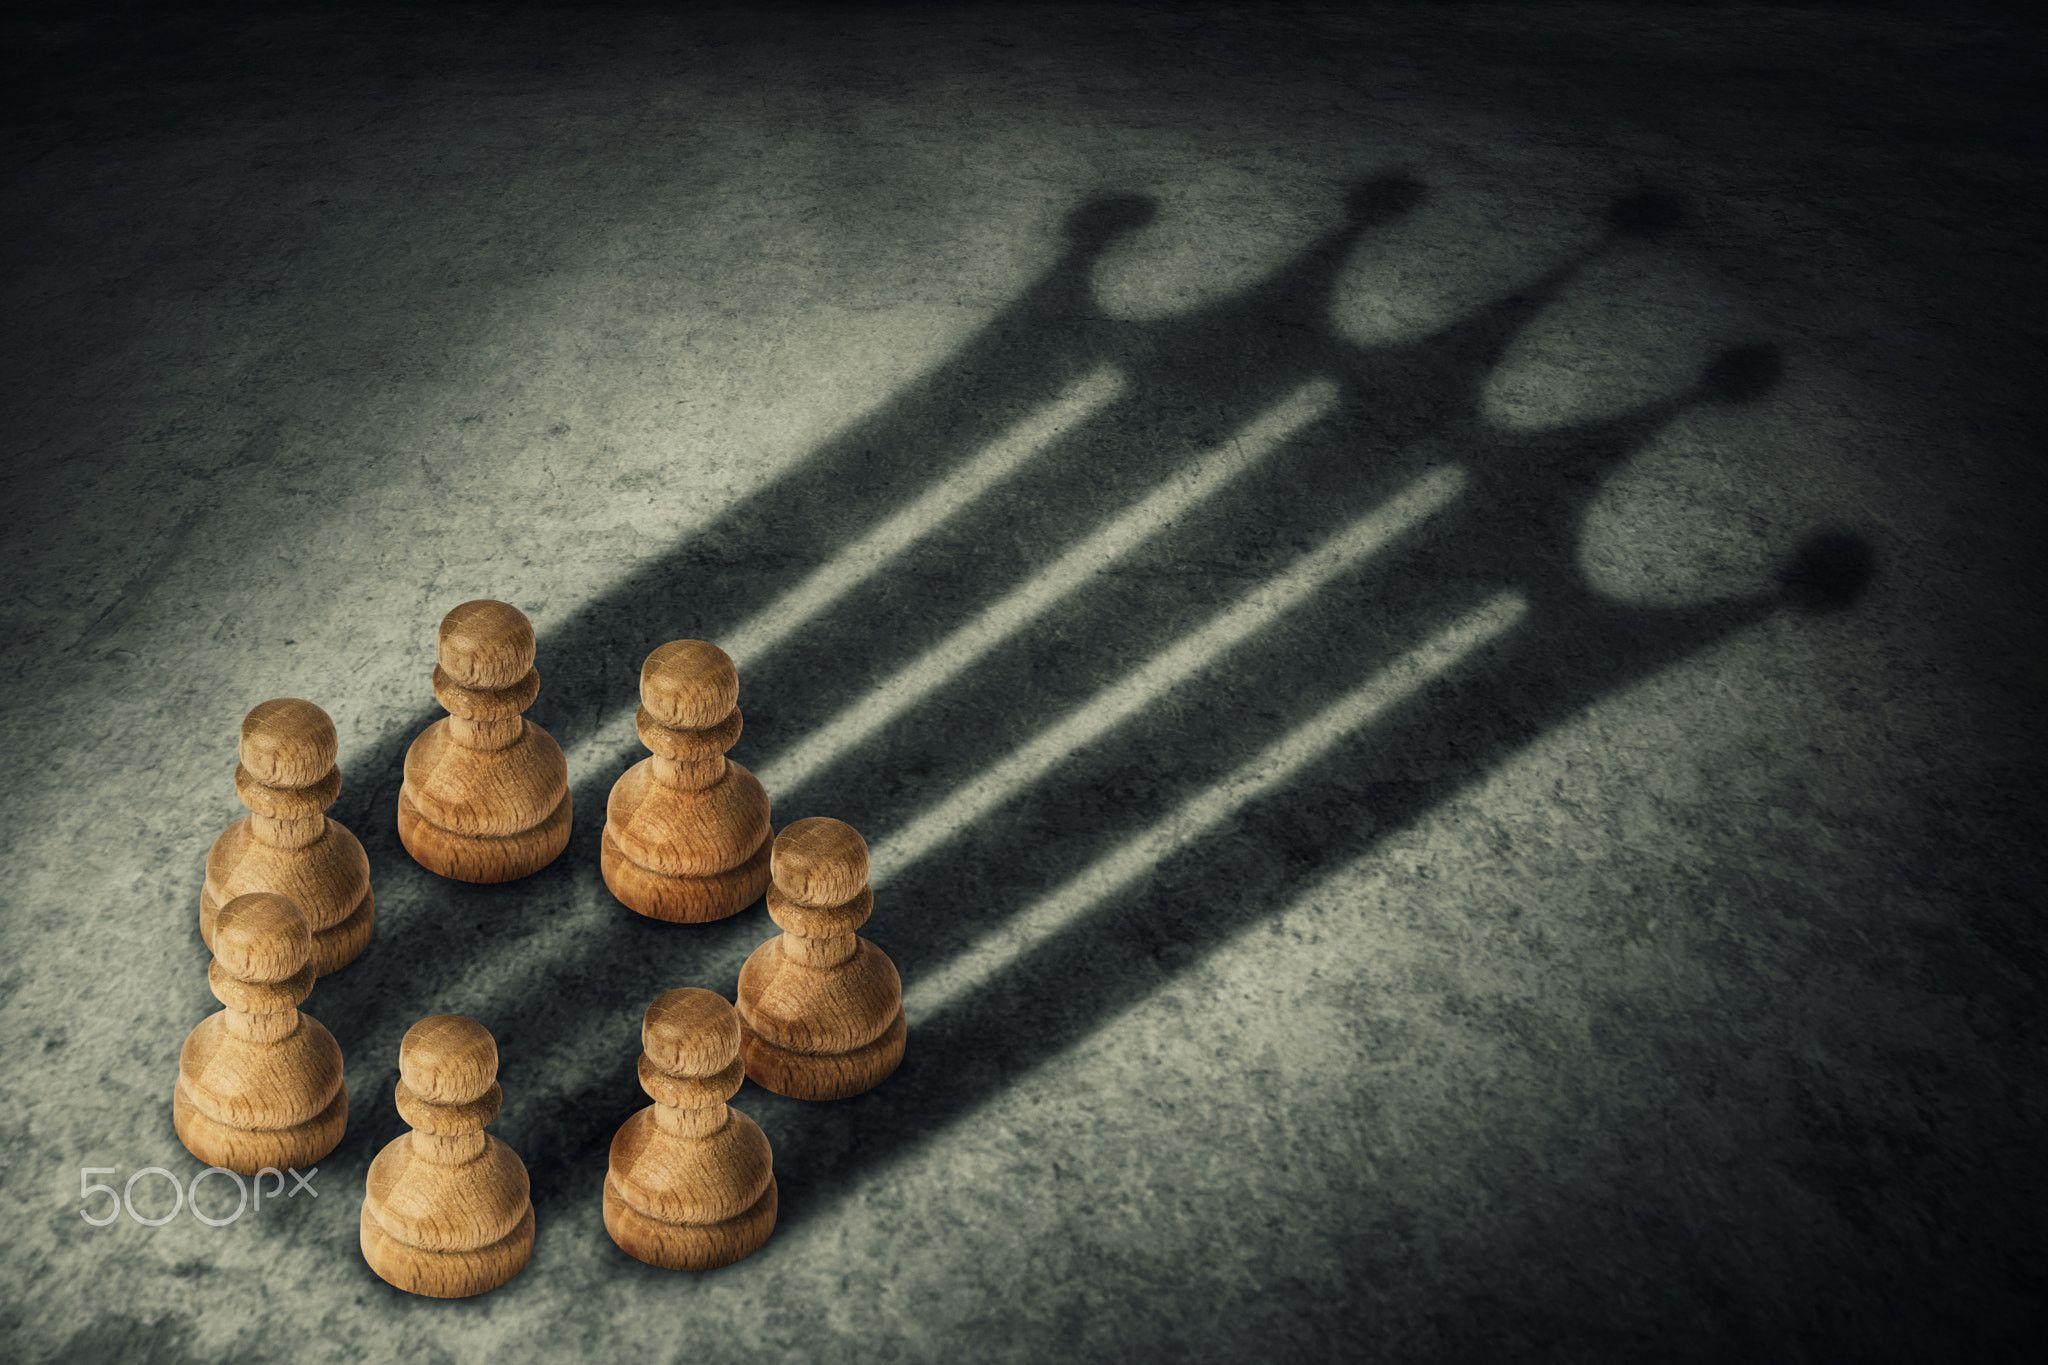 Aesthetic Chess Wallpaper Download